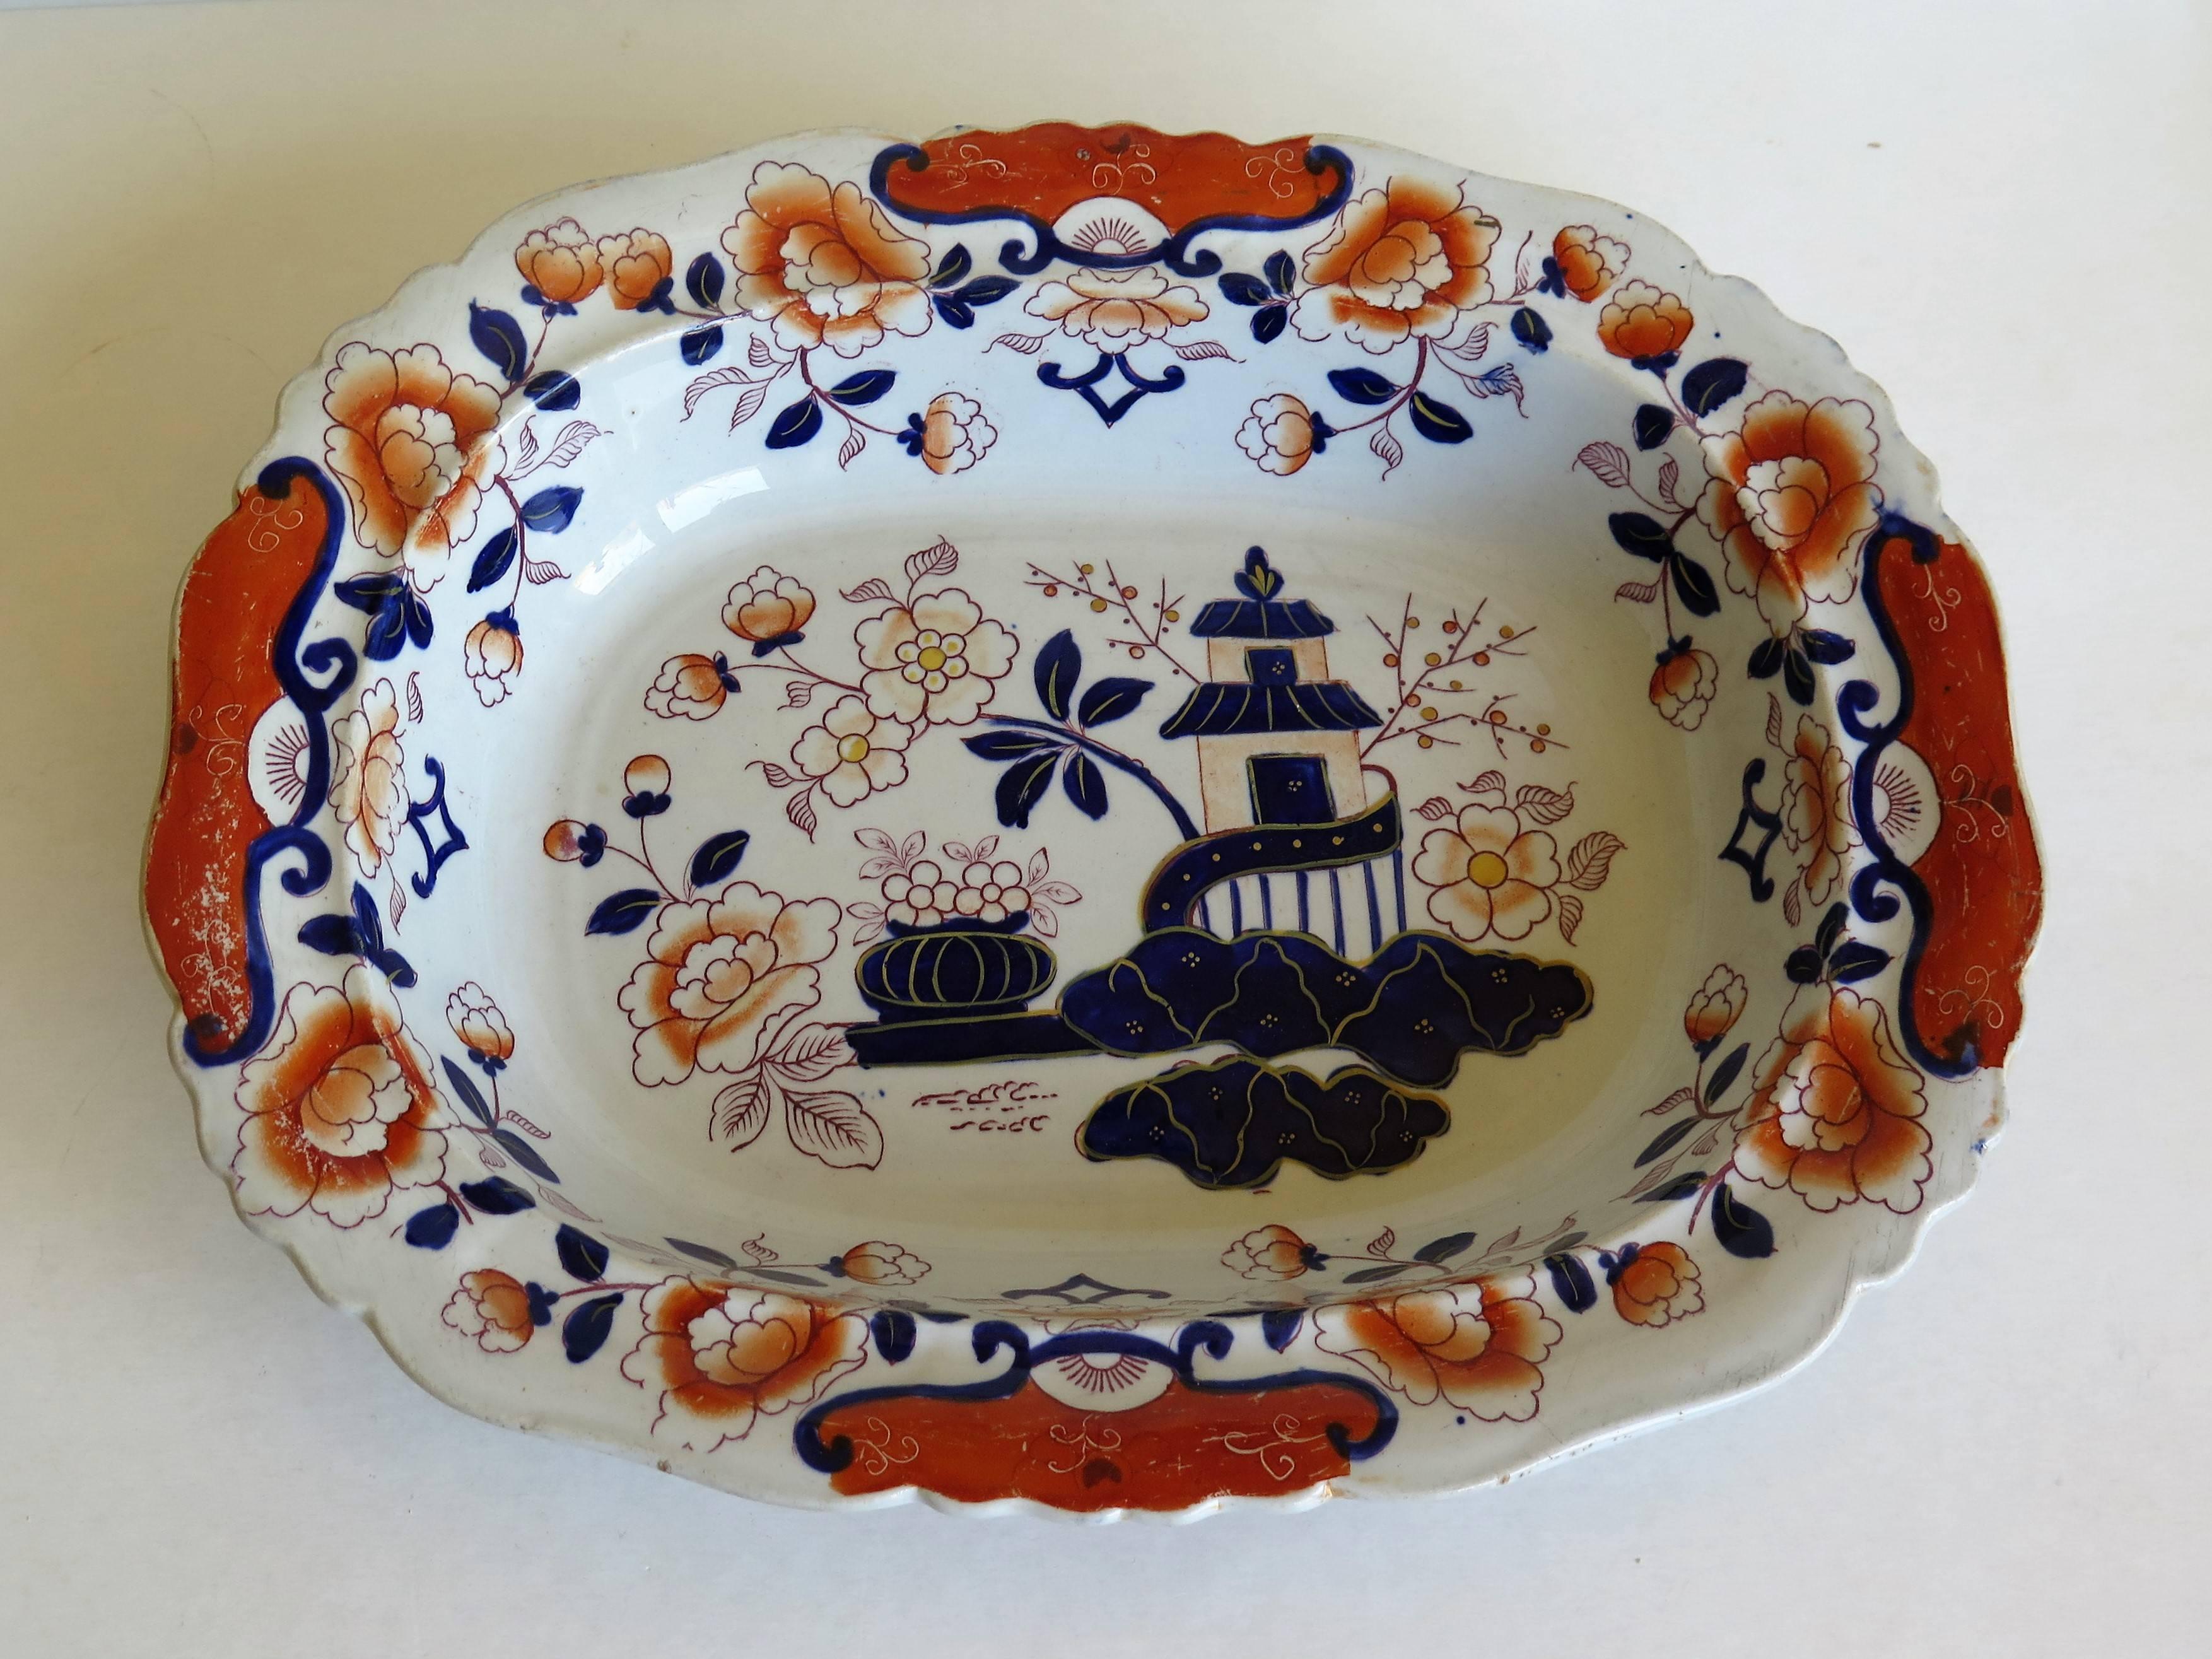 This is a very attractive Mason's Ironstone large Dish made during the mid-19th century, when Mason's was owned by Ashworth Brothers, circa 1865.

The dish has a good Chinoiserie pattern, number 124, depicting a pagoda scene by rocks with a large